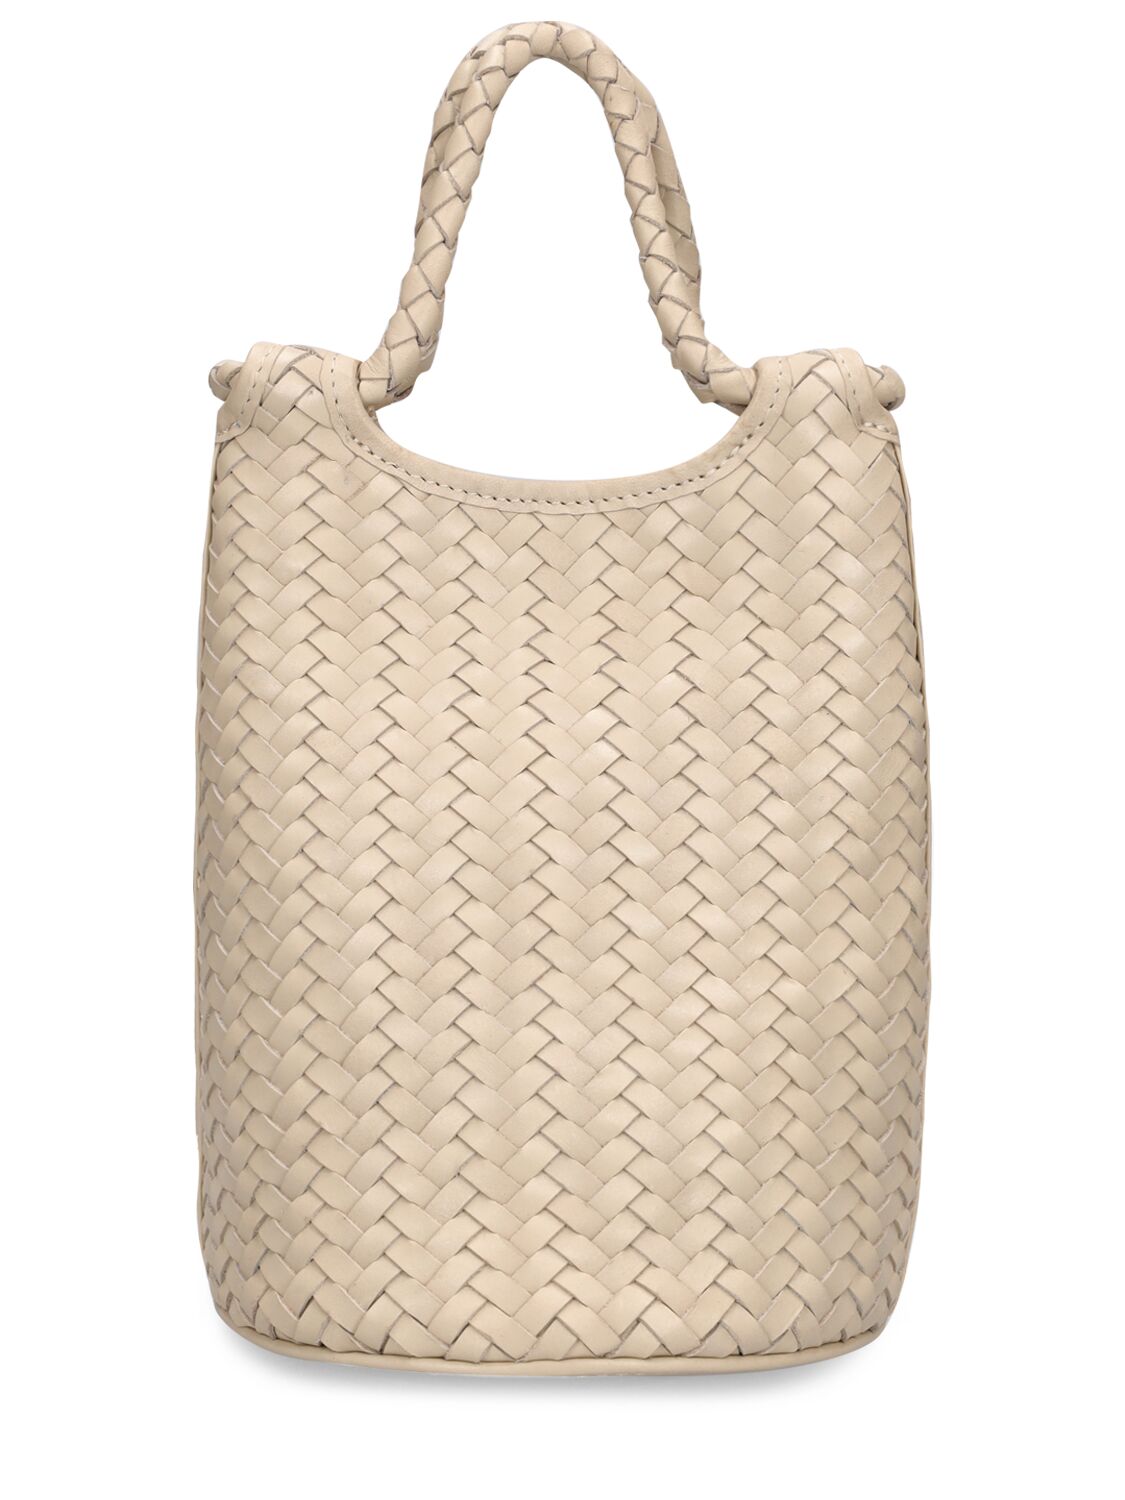 Bembien Lina Woven Leather Top Handle Bag In Cream